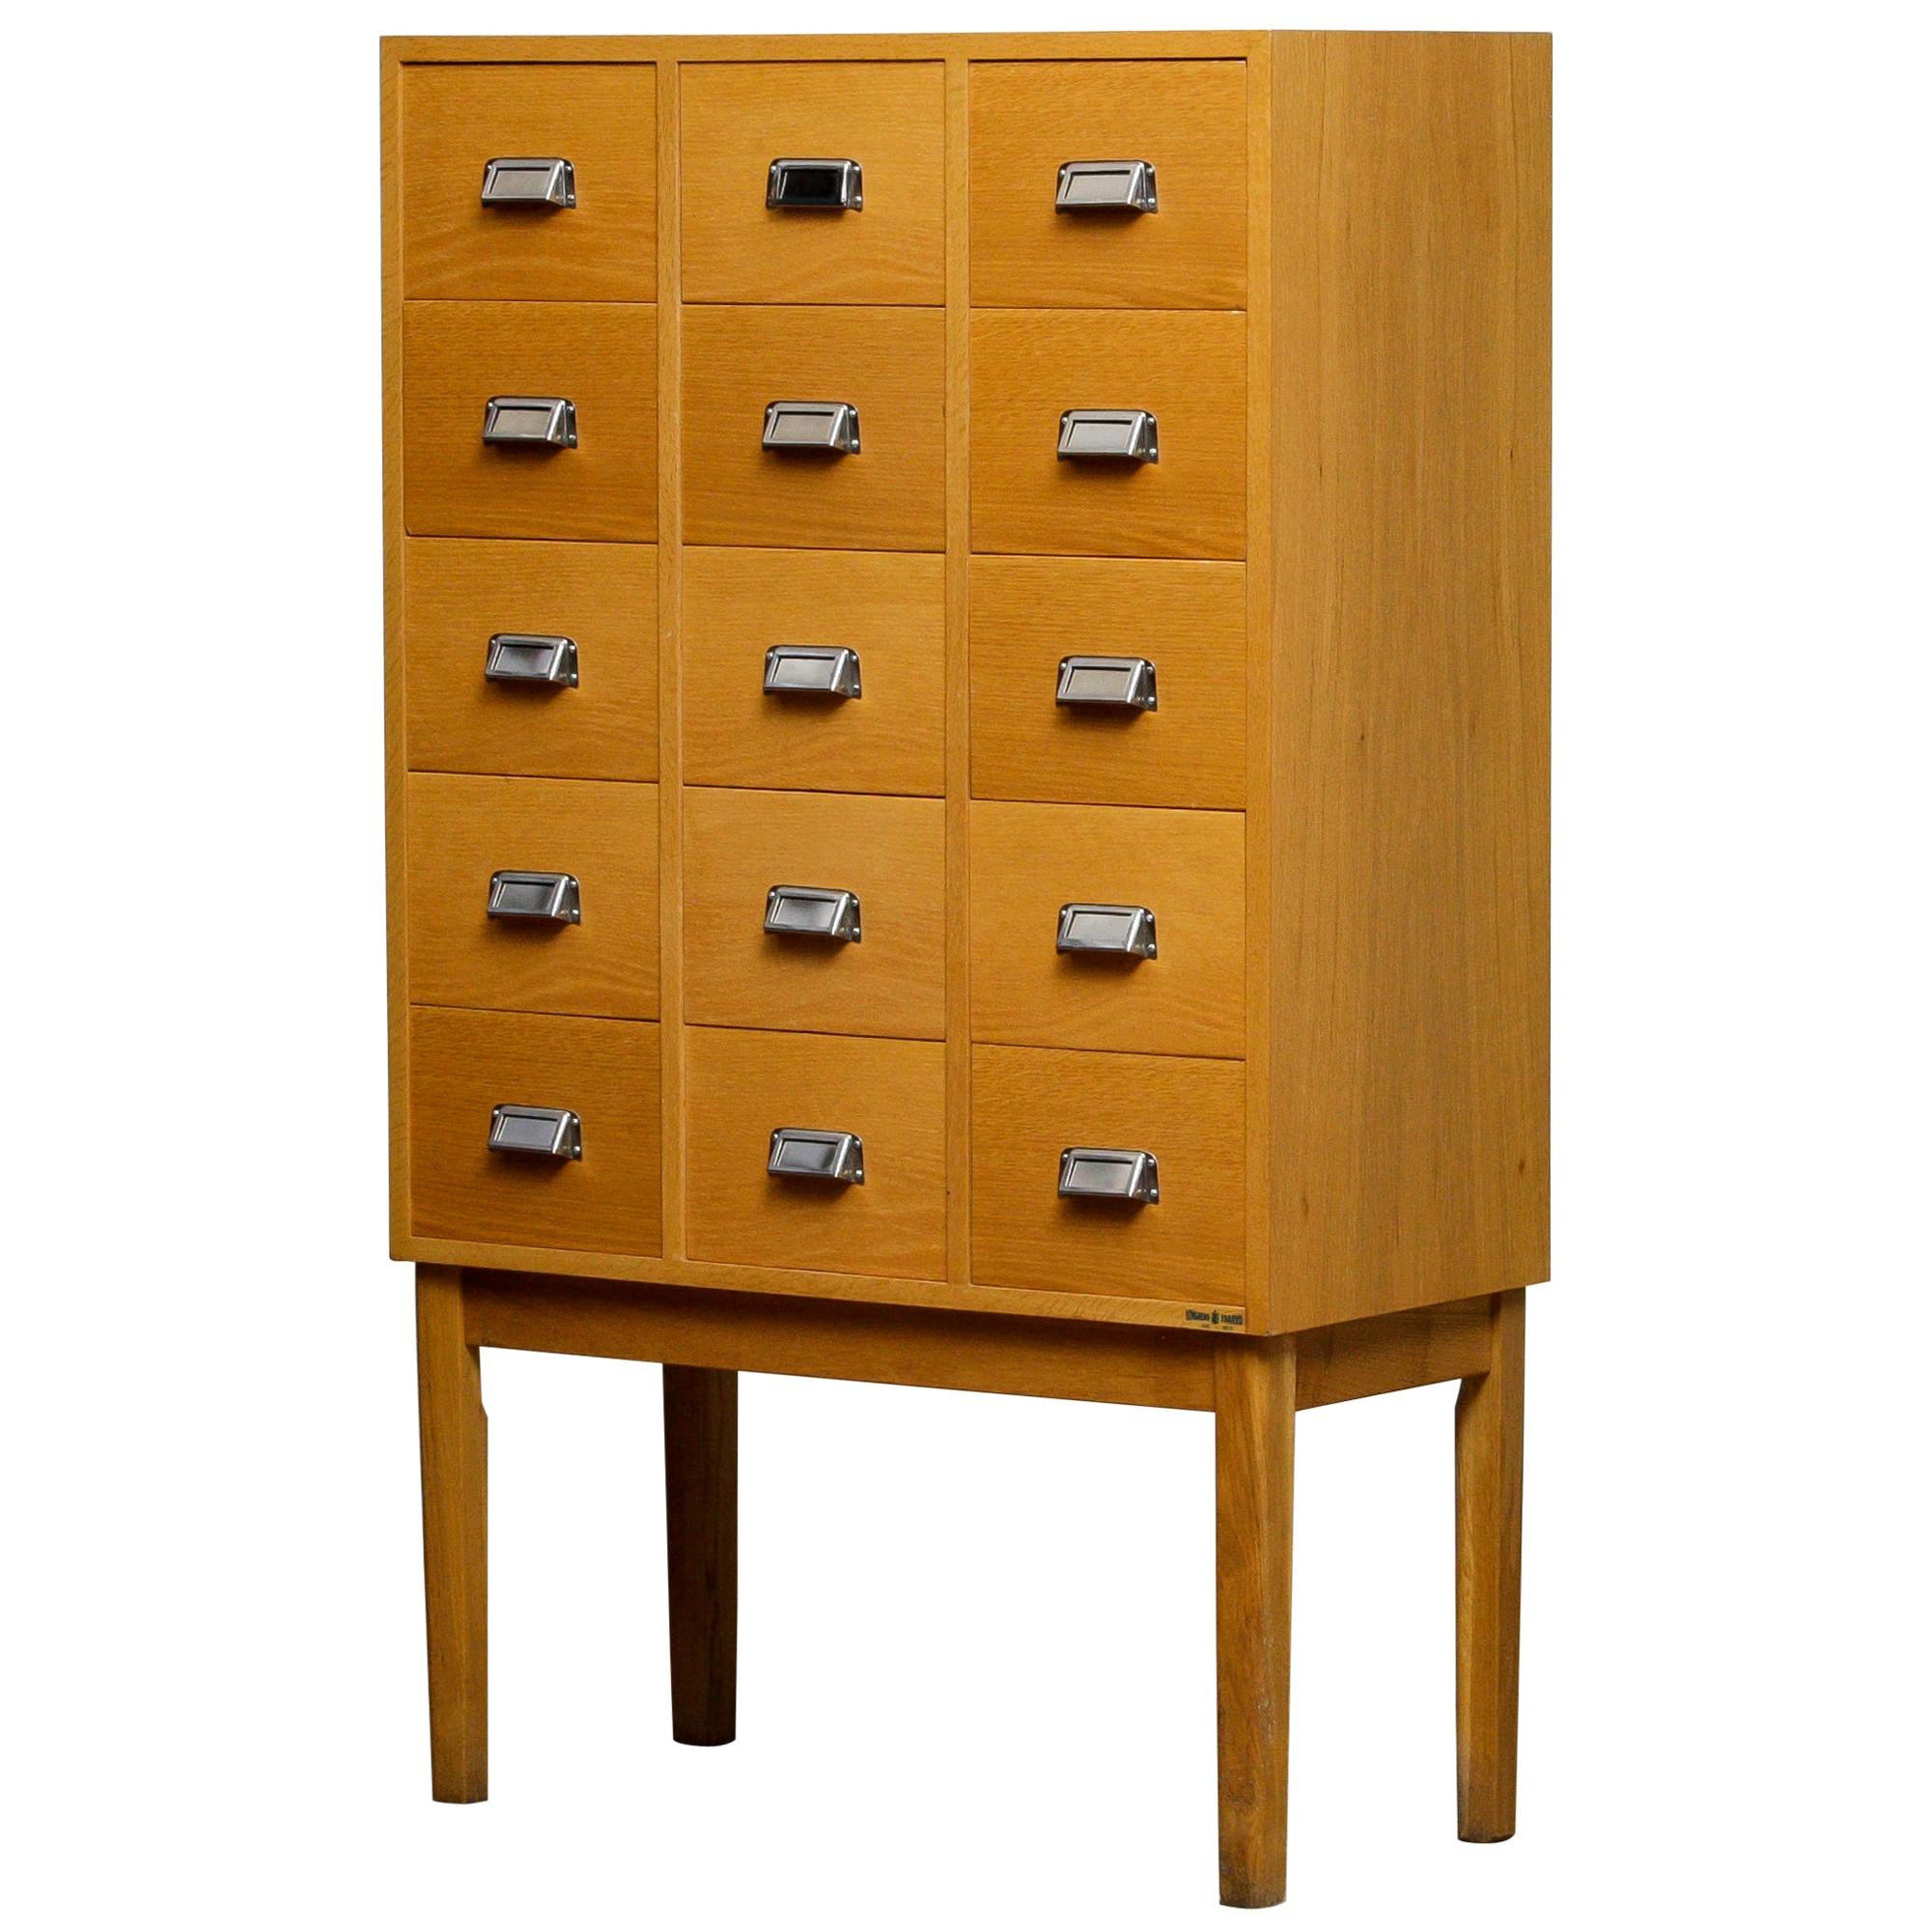 Beautiful and very decorative high legged oak drawer / filing cabinet by Lövgrens Sweden from the 1970s.
Fifteen beech drawers veneered in oak in, overall, good condition.